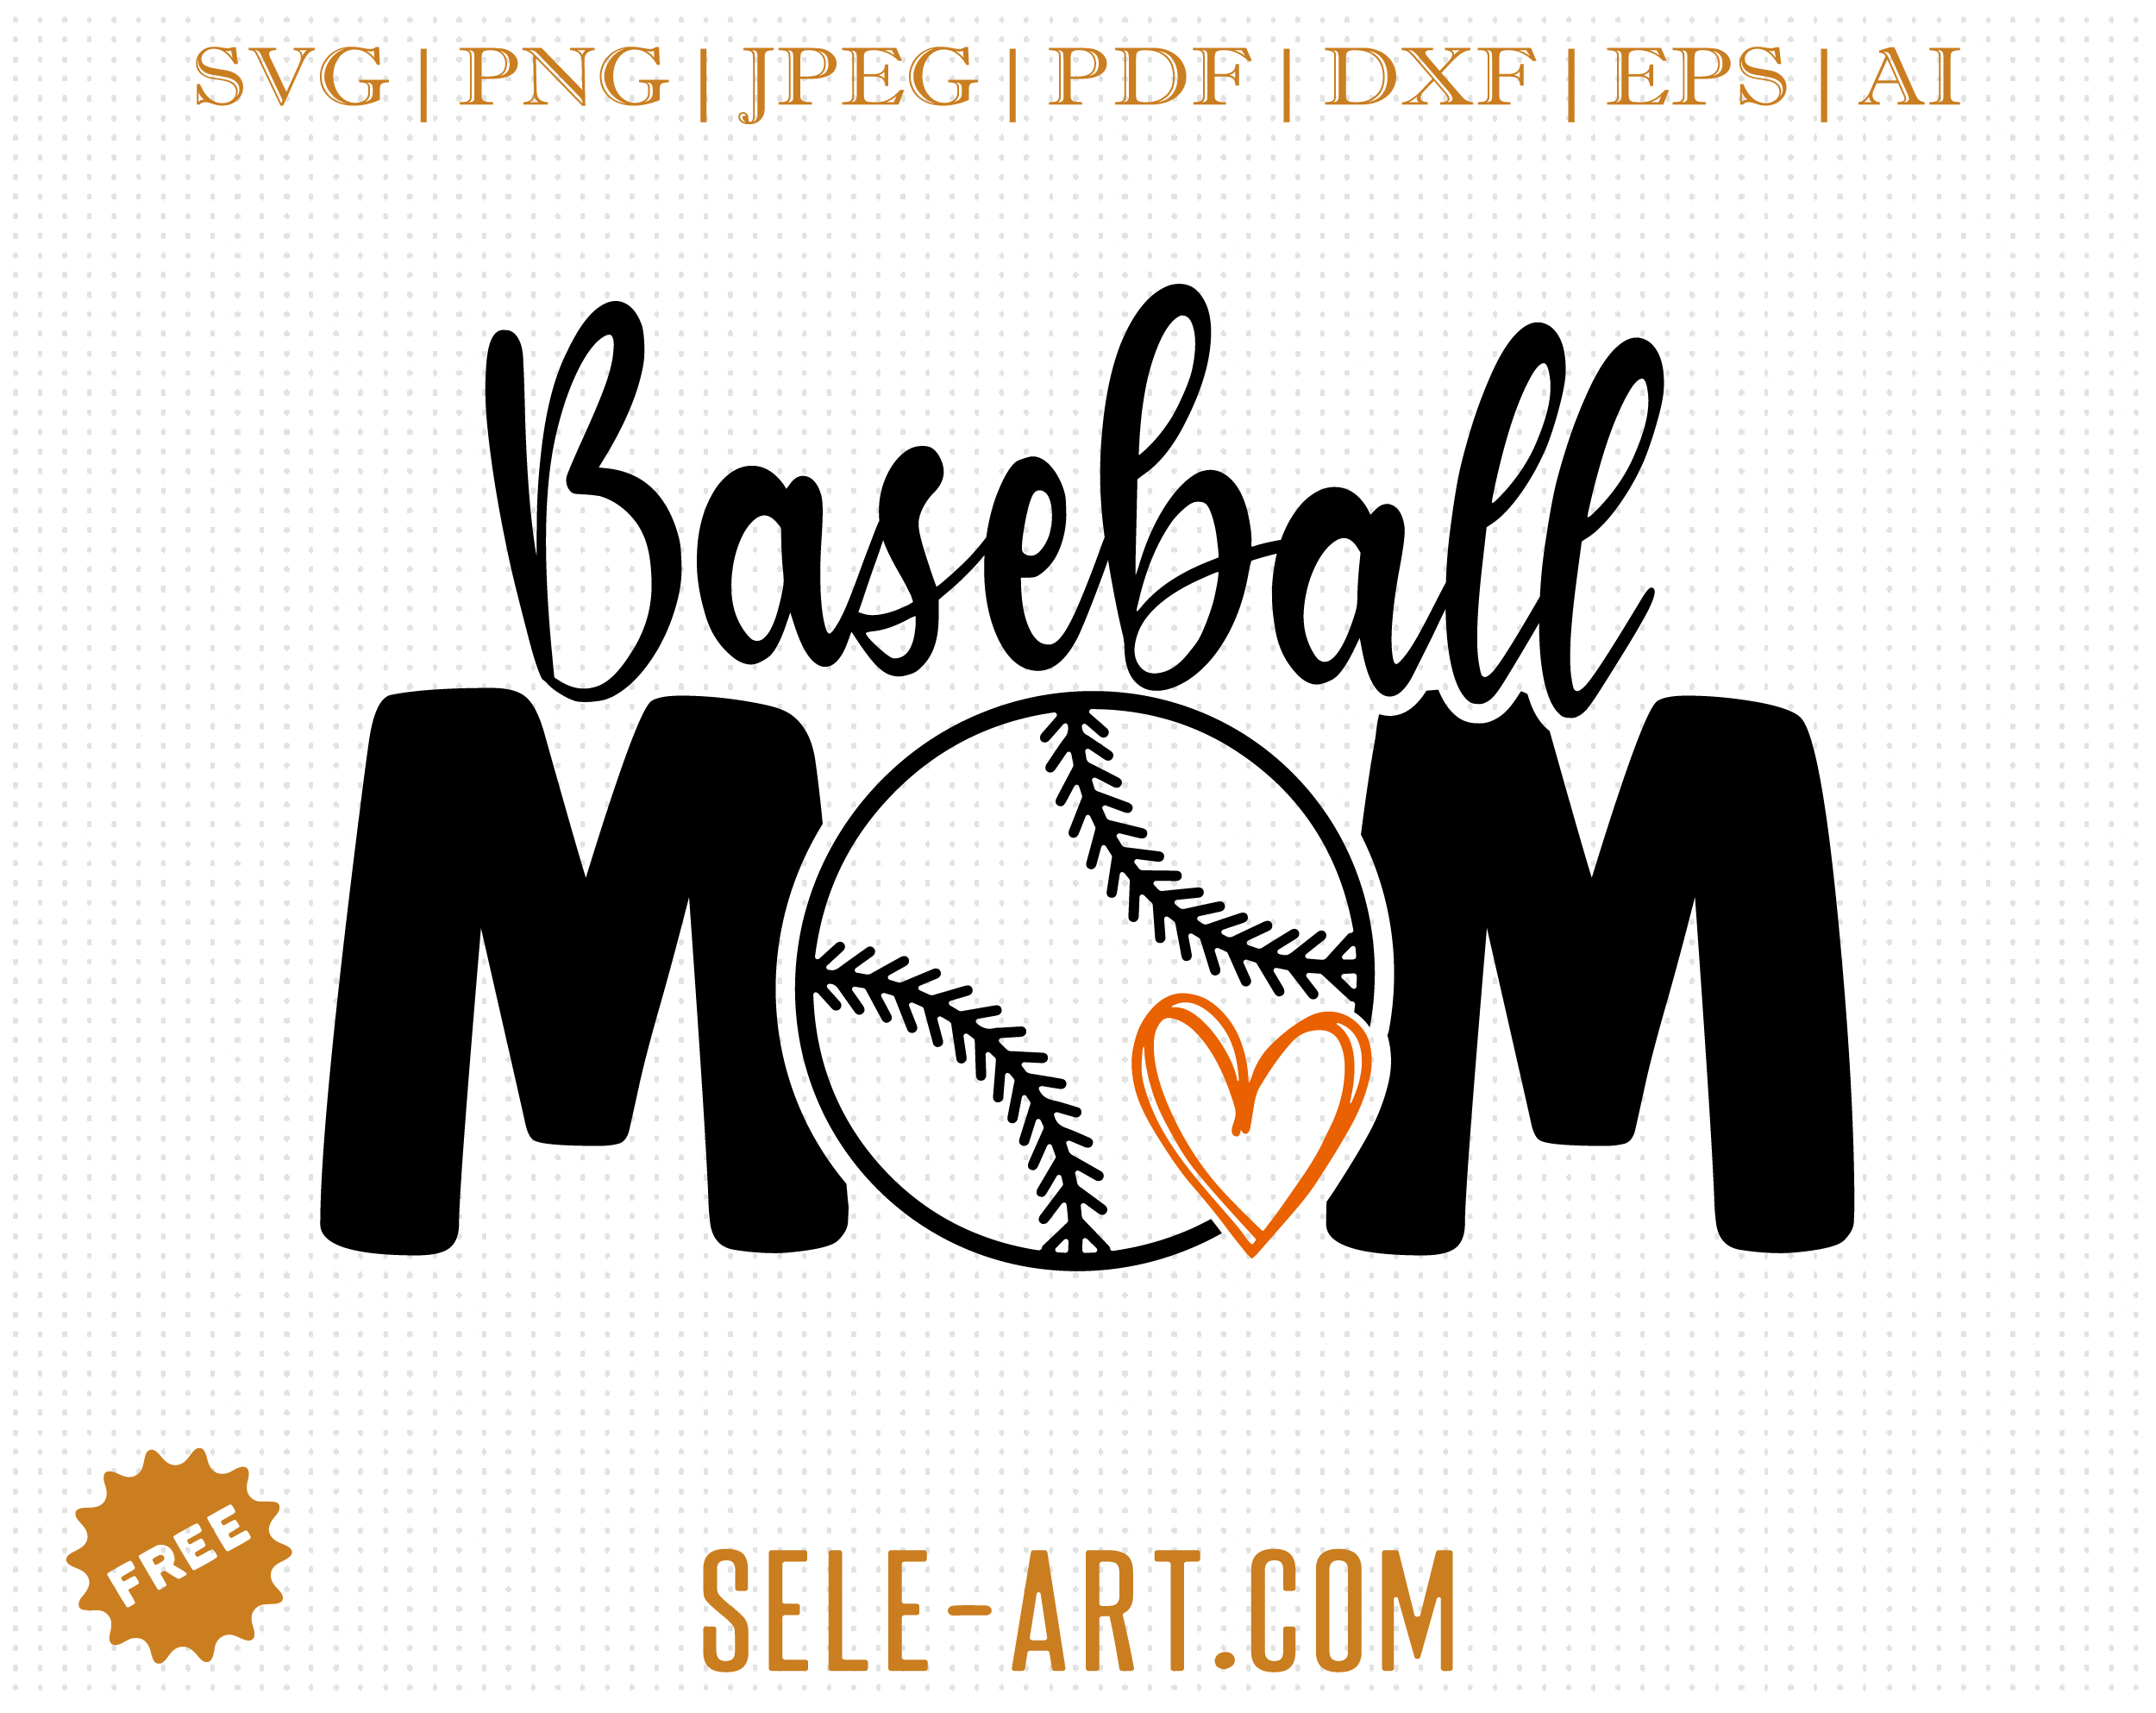 abby mcmillen add photo baseball mom images